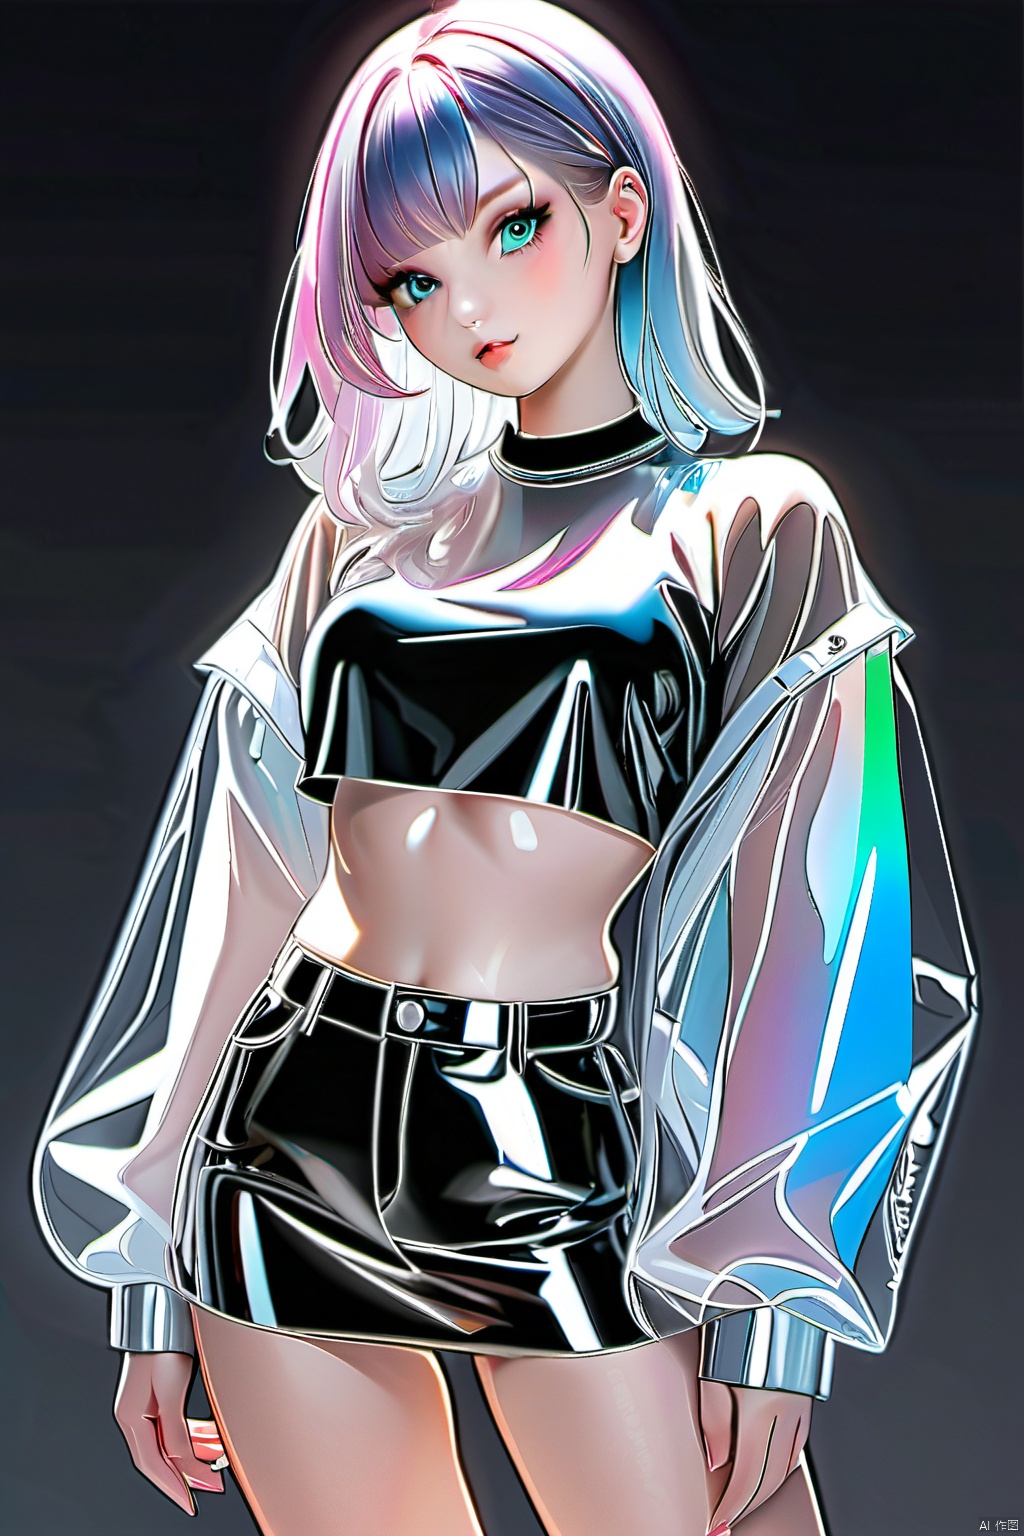  Best quality,masterpiece,transparent color PVC clothing,transparent color vinyl clothing,prismatic,holographic,chromatic aberration,fashion illustration,masterpiece,girl with harajuku fashion,looking at viewer,8k,ultra detailed,pixiv